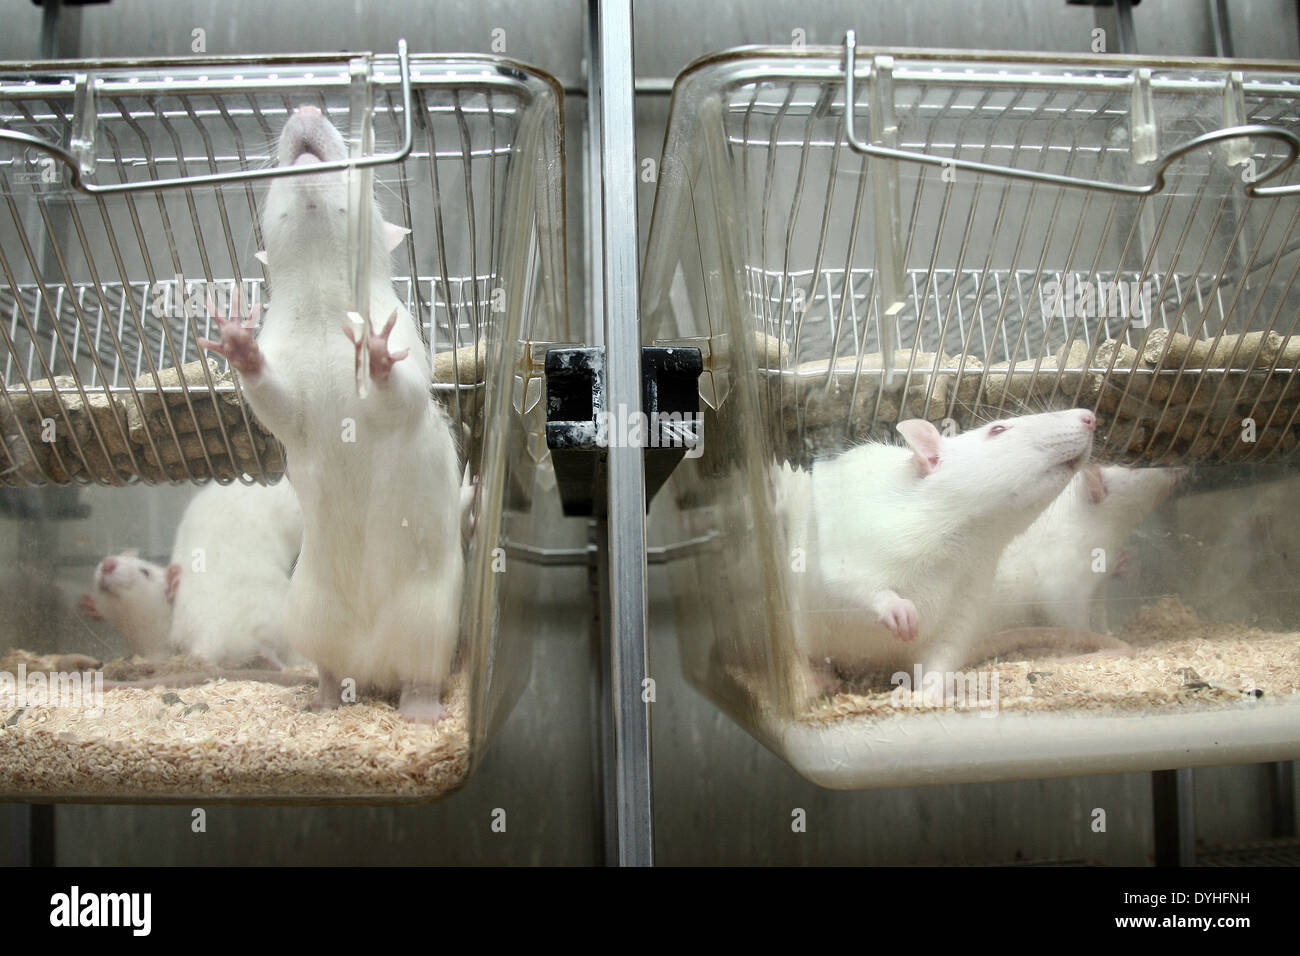 https://c8.alamy.com/comp/DYHFNH/white-laboratory-rats-in-a-cage-DYHFNH.jpg